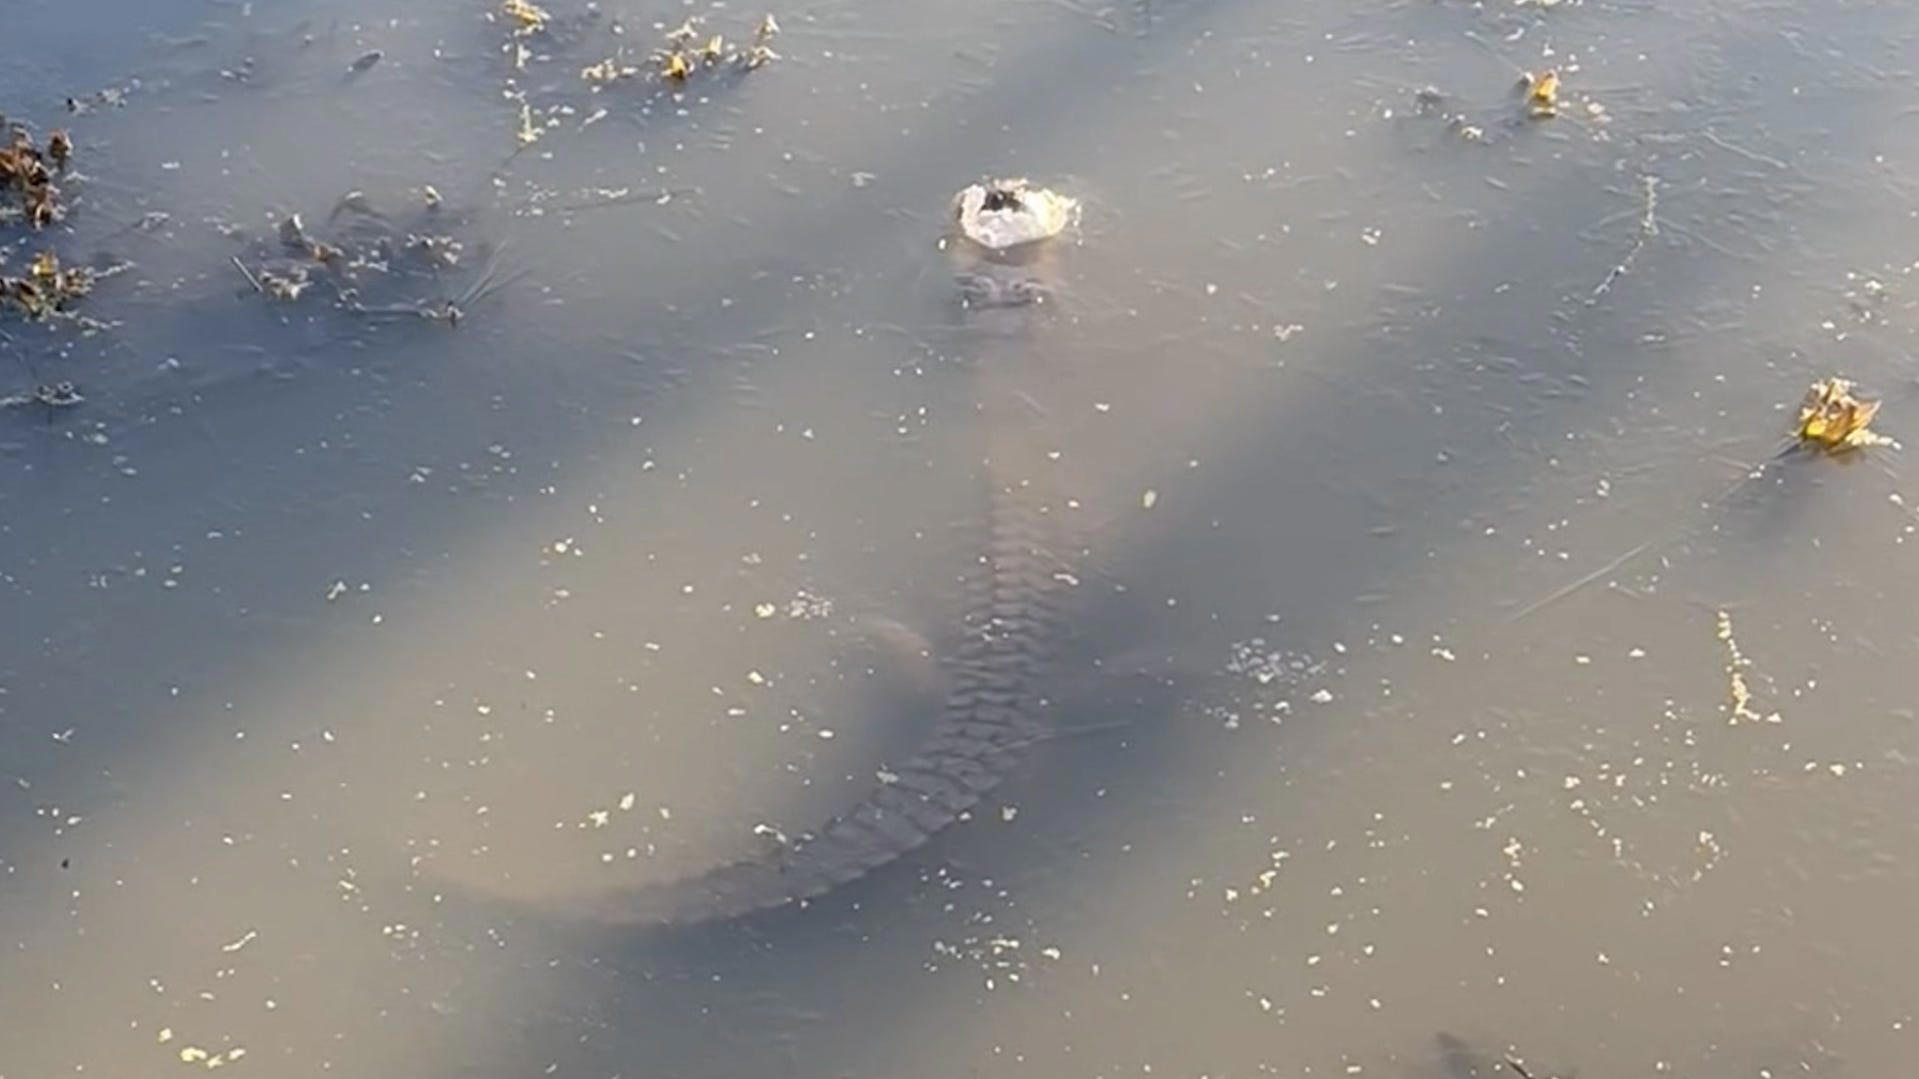 Alligator survives in frozen pond by sticking out its snout